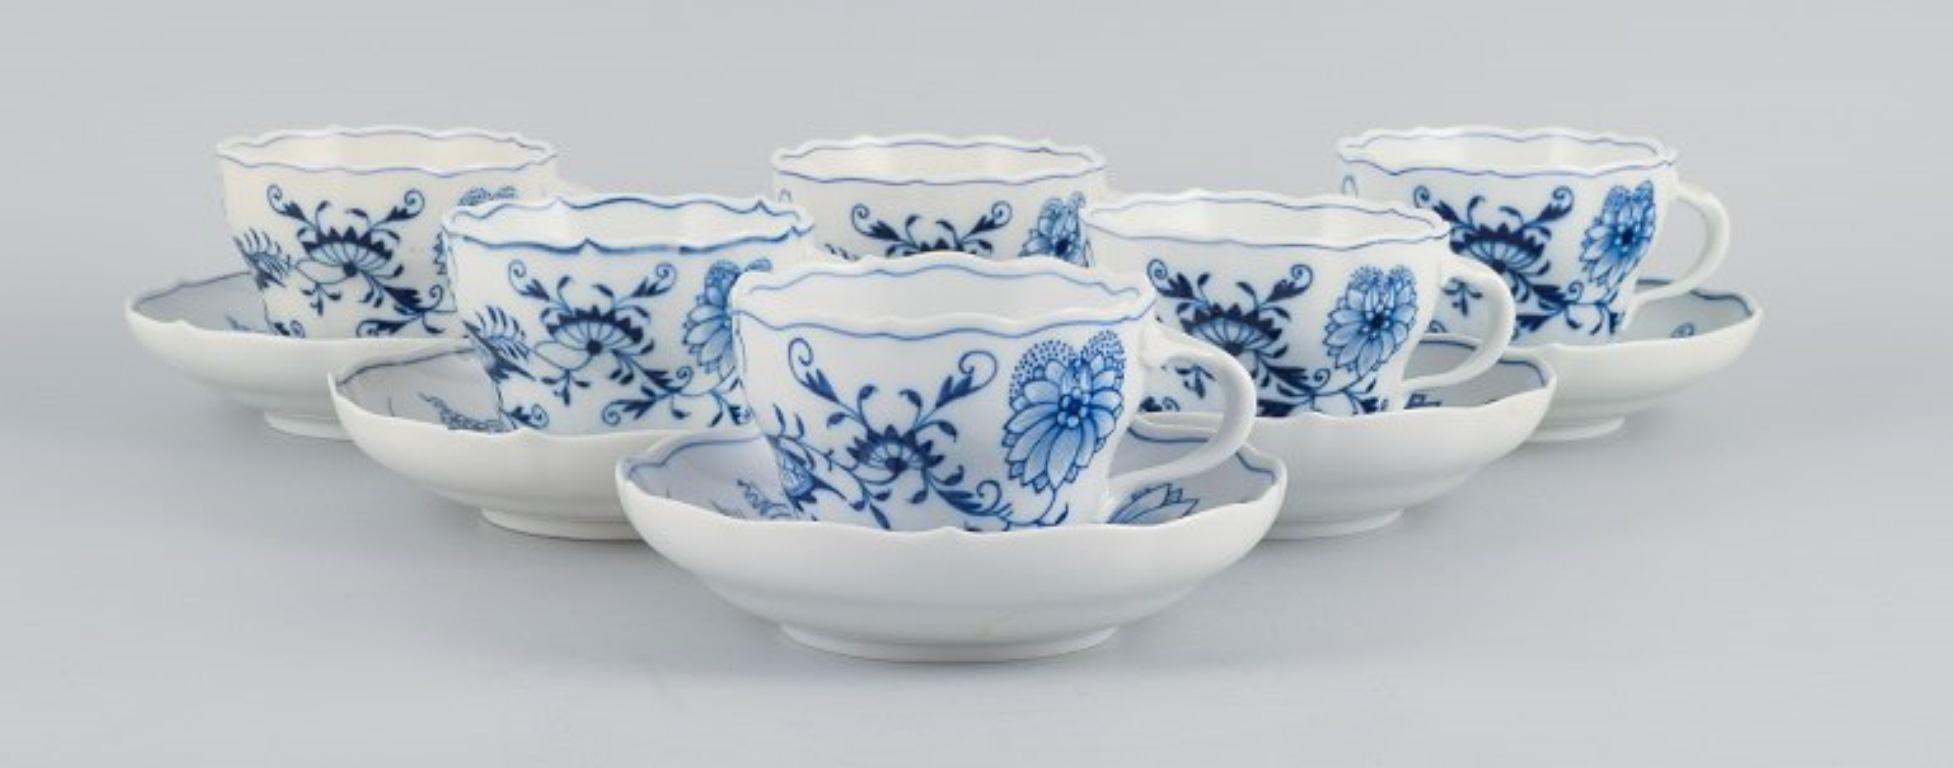 Meissen, Germany. Six Meissen Blue Onion coffee cups with saucers in hand-painted porcelain.
Approx. 1930s.
In excellent condition, a few saucers with minor insignificant chips on rim.
Marked.
First factory quality.
Cup: D 8.8 x H 6.7